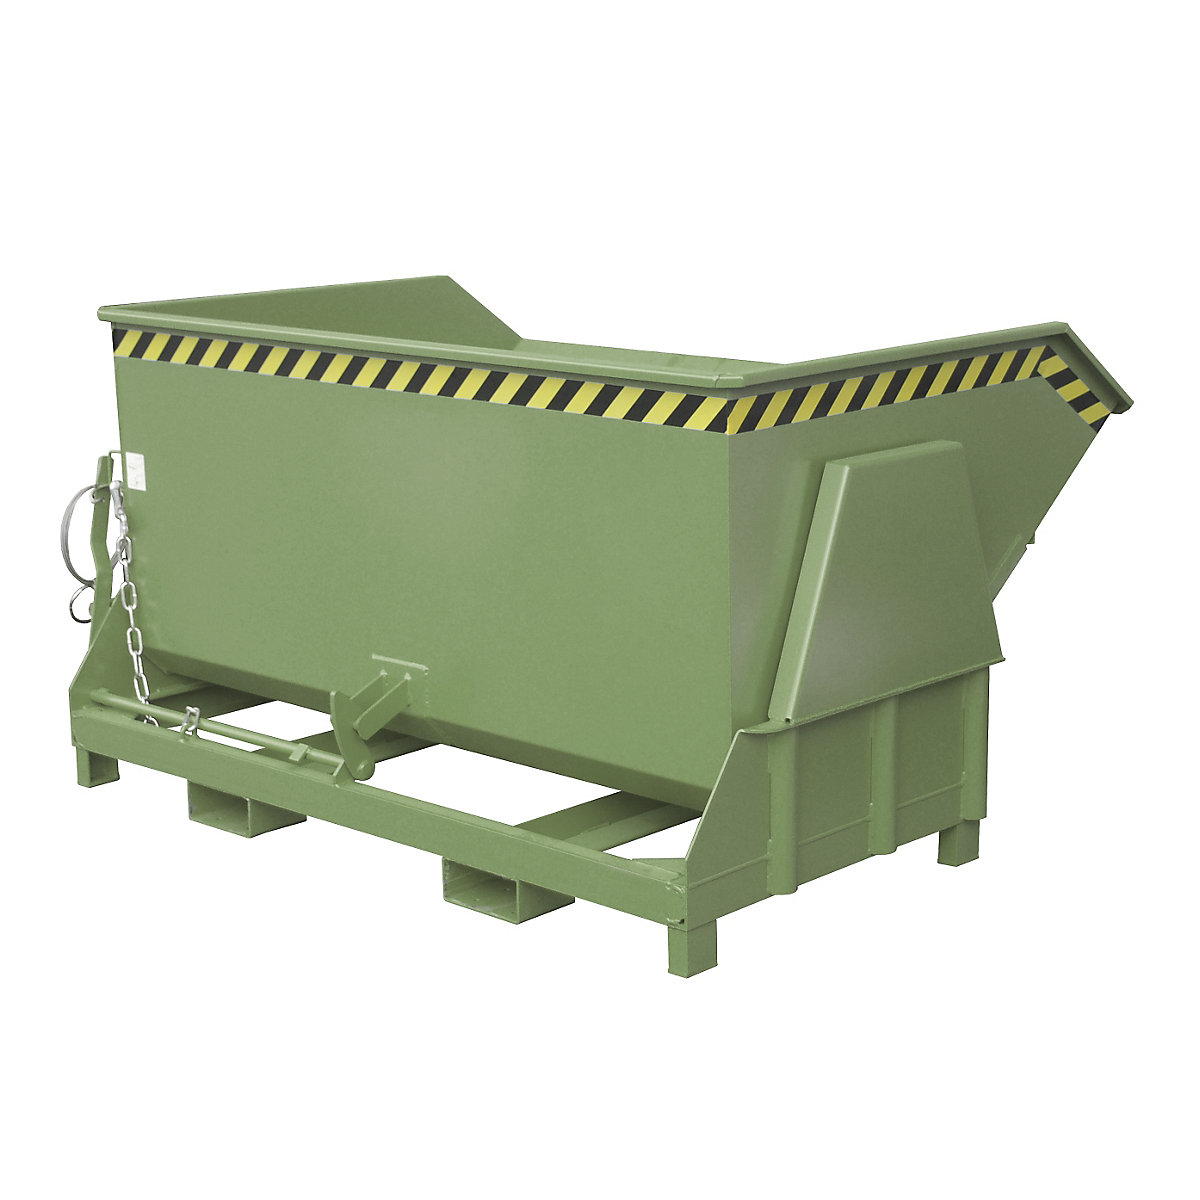 Tilting skip, standard overall height, without wheels – eurokraft pro, capacity 1.5 m³, painted green RAL 6011-10